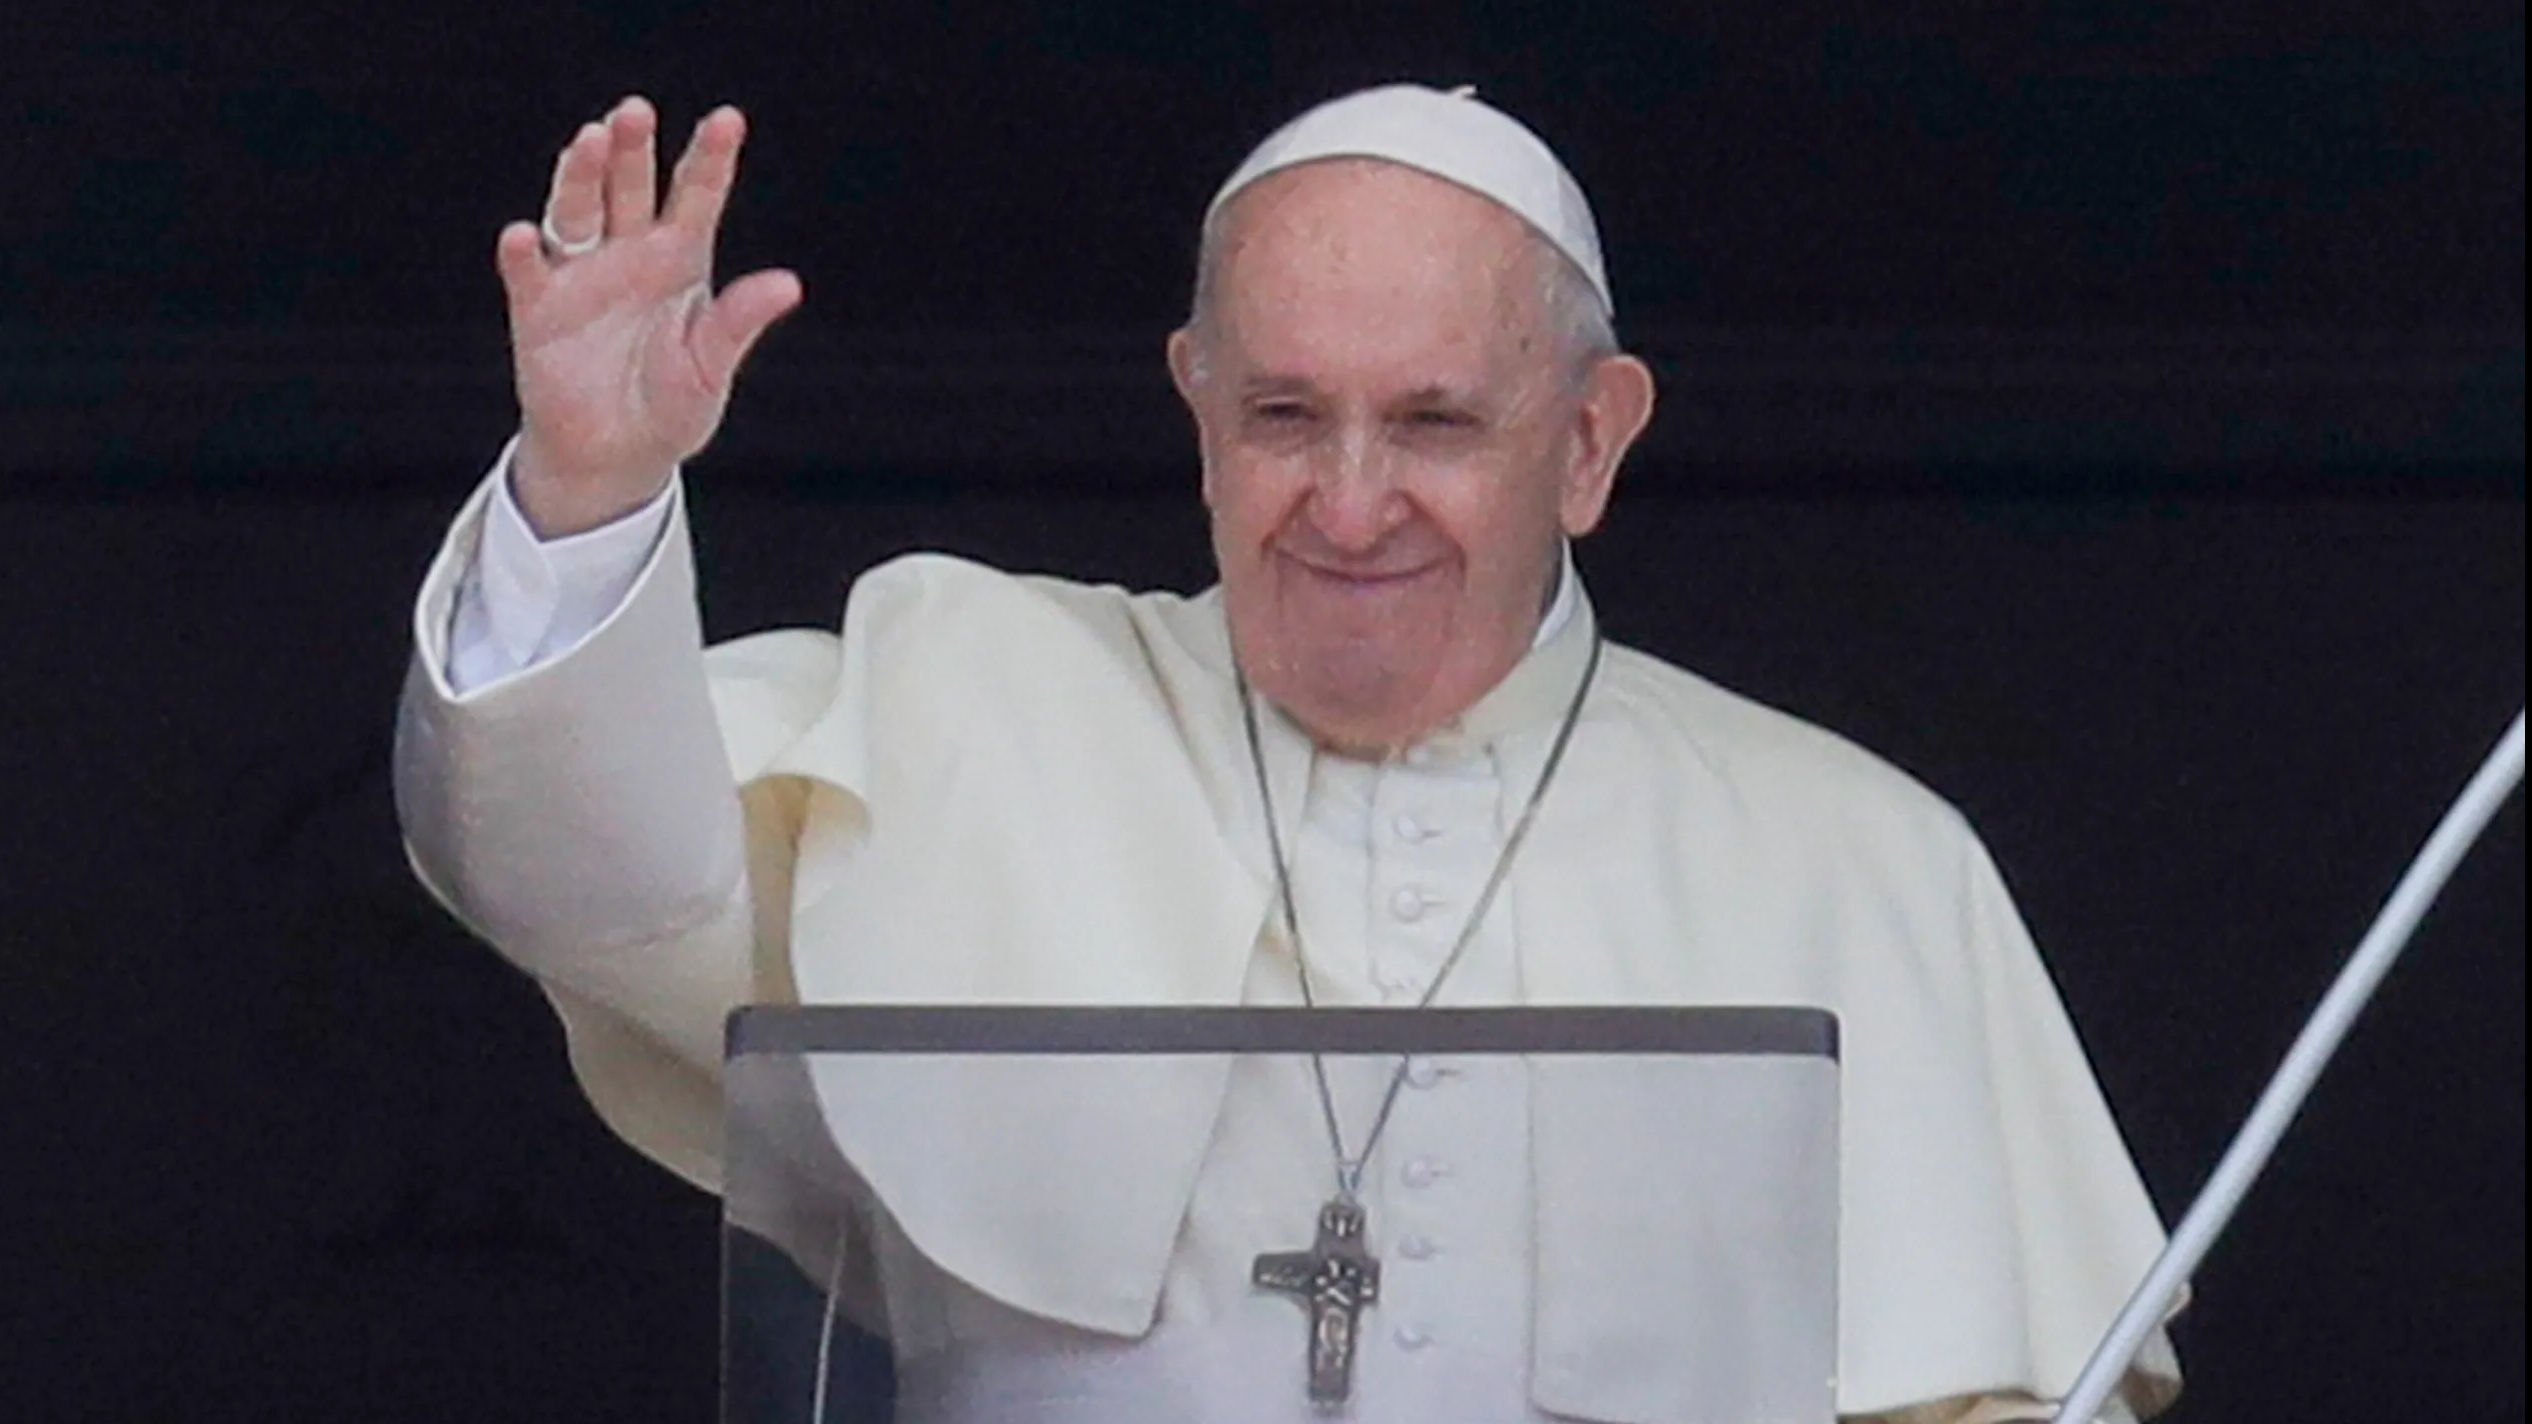 ‘Gossip is a plague worse than COVID-19’: Pope Francis